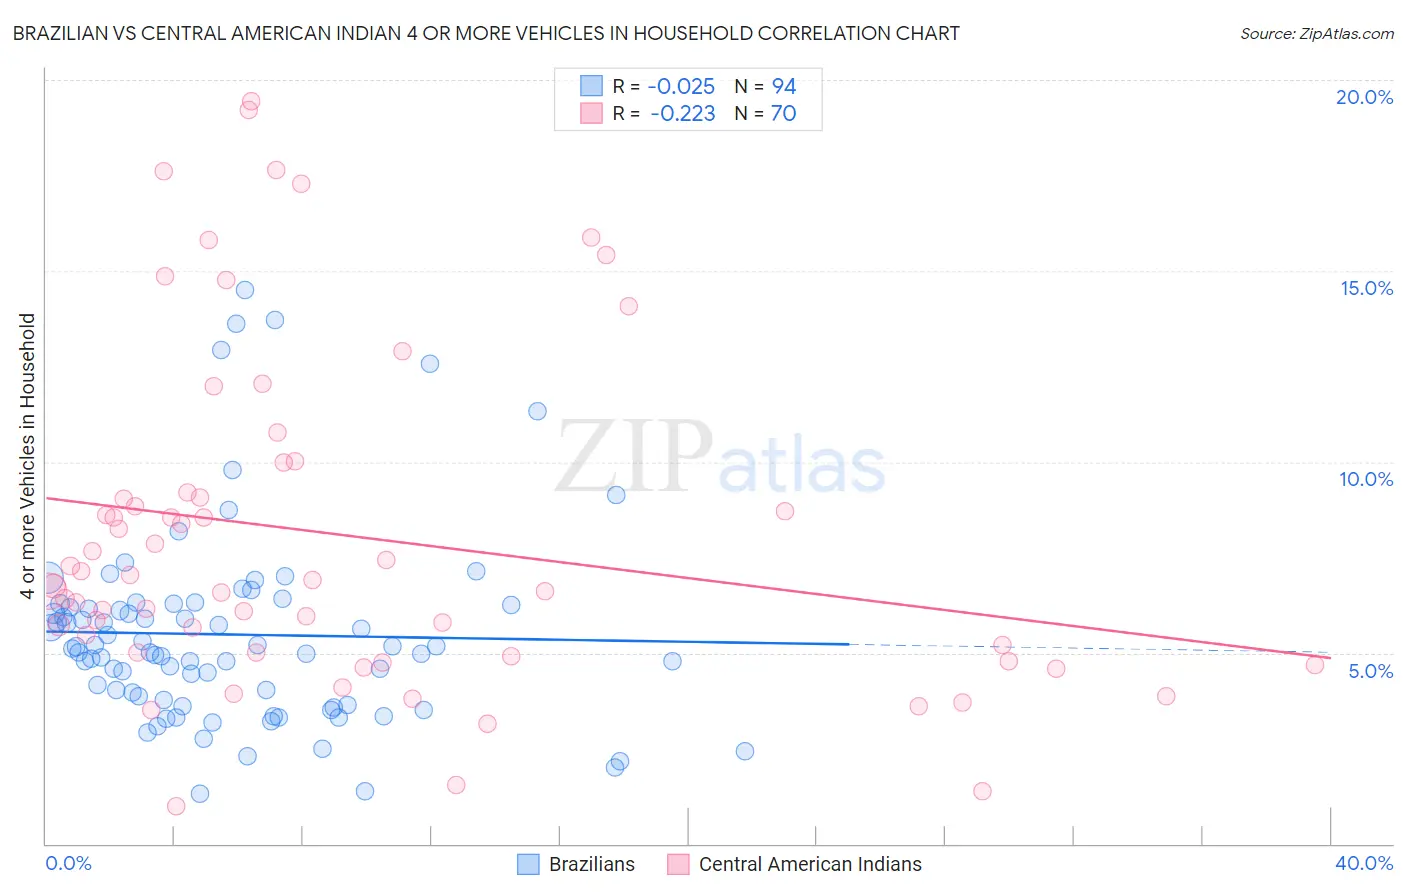 Brazilian vs Central American Indian 4 or more Vehicles in Household